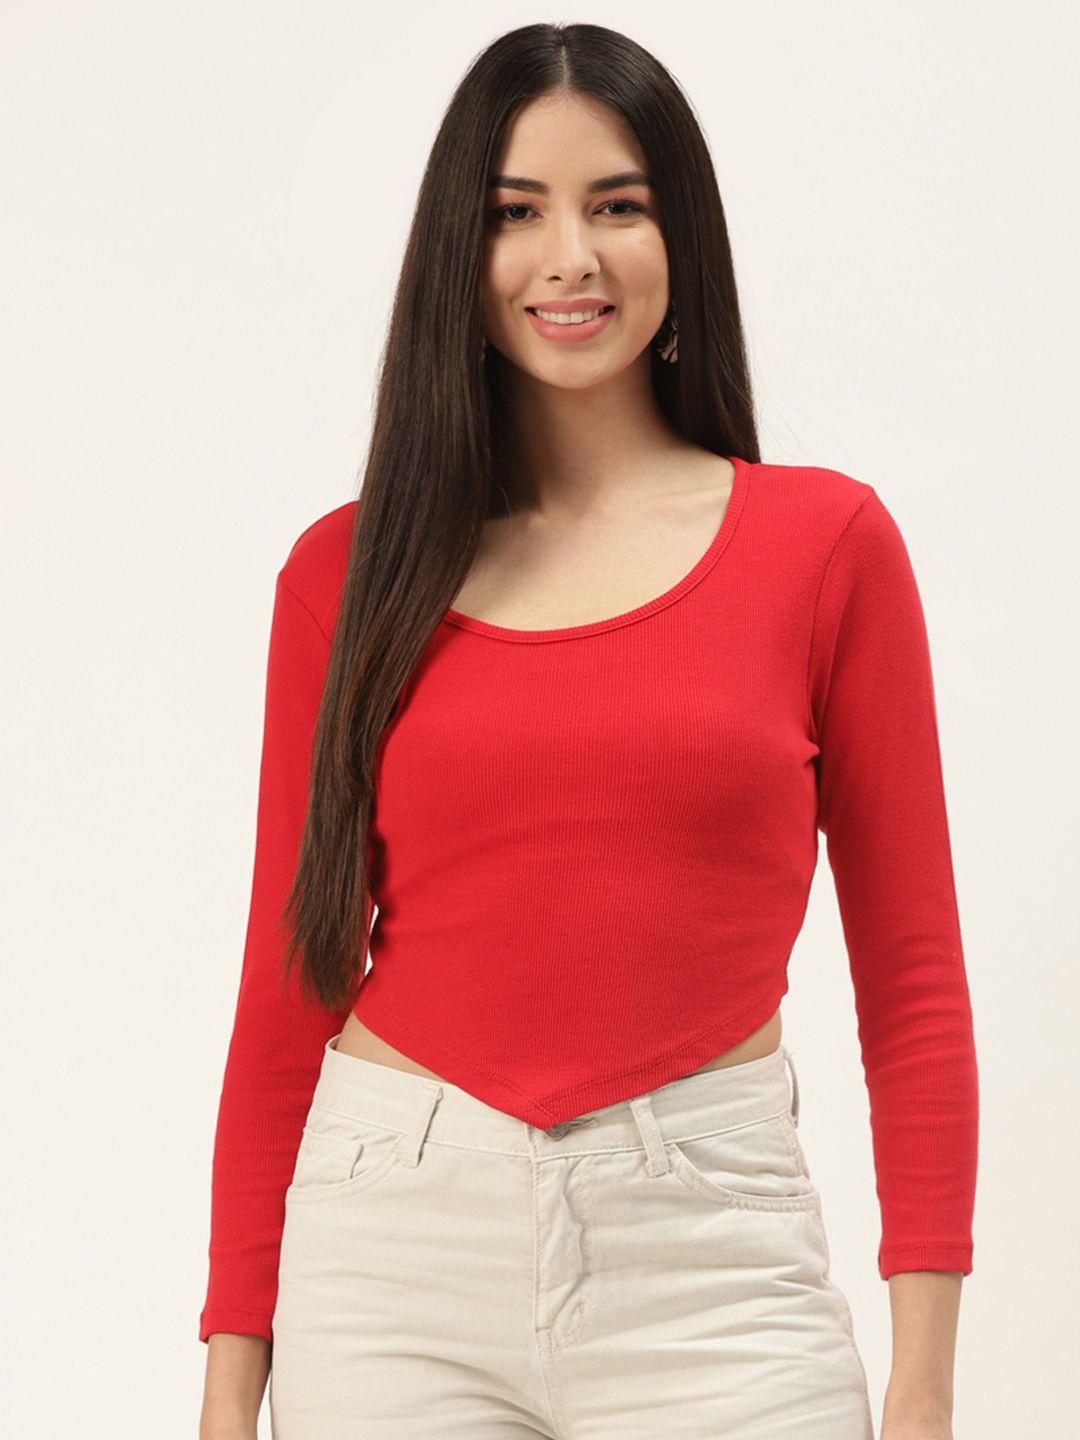 off label red striped high-low top